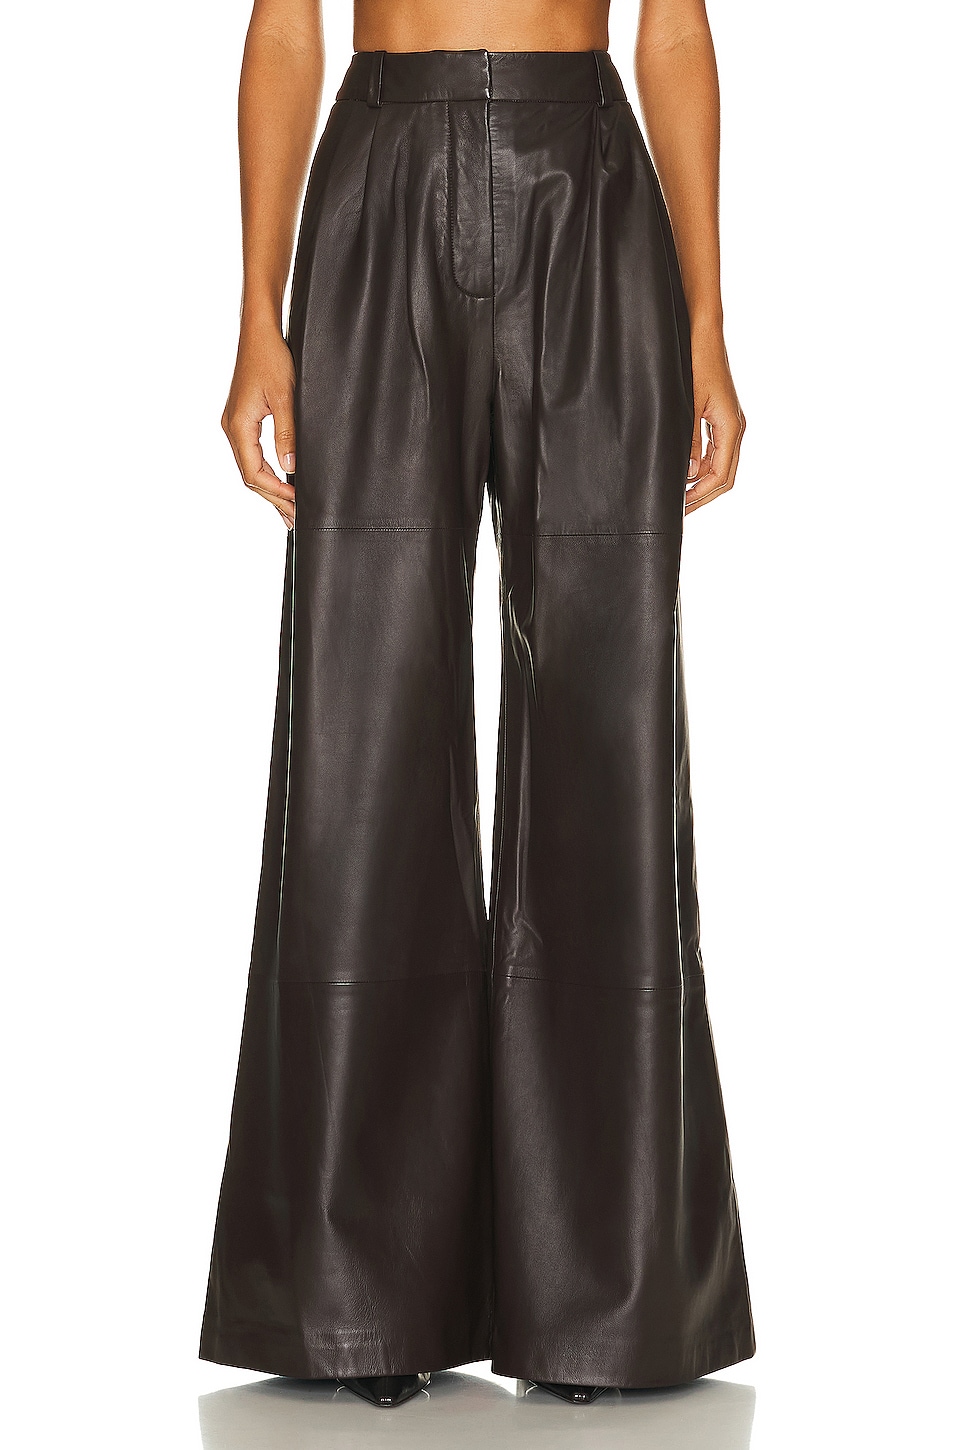 Image 1 of Zimmermann Luminosity Leather Pant in Espresso